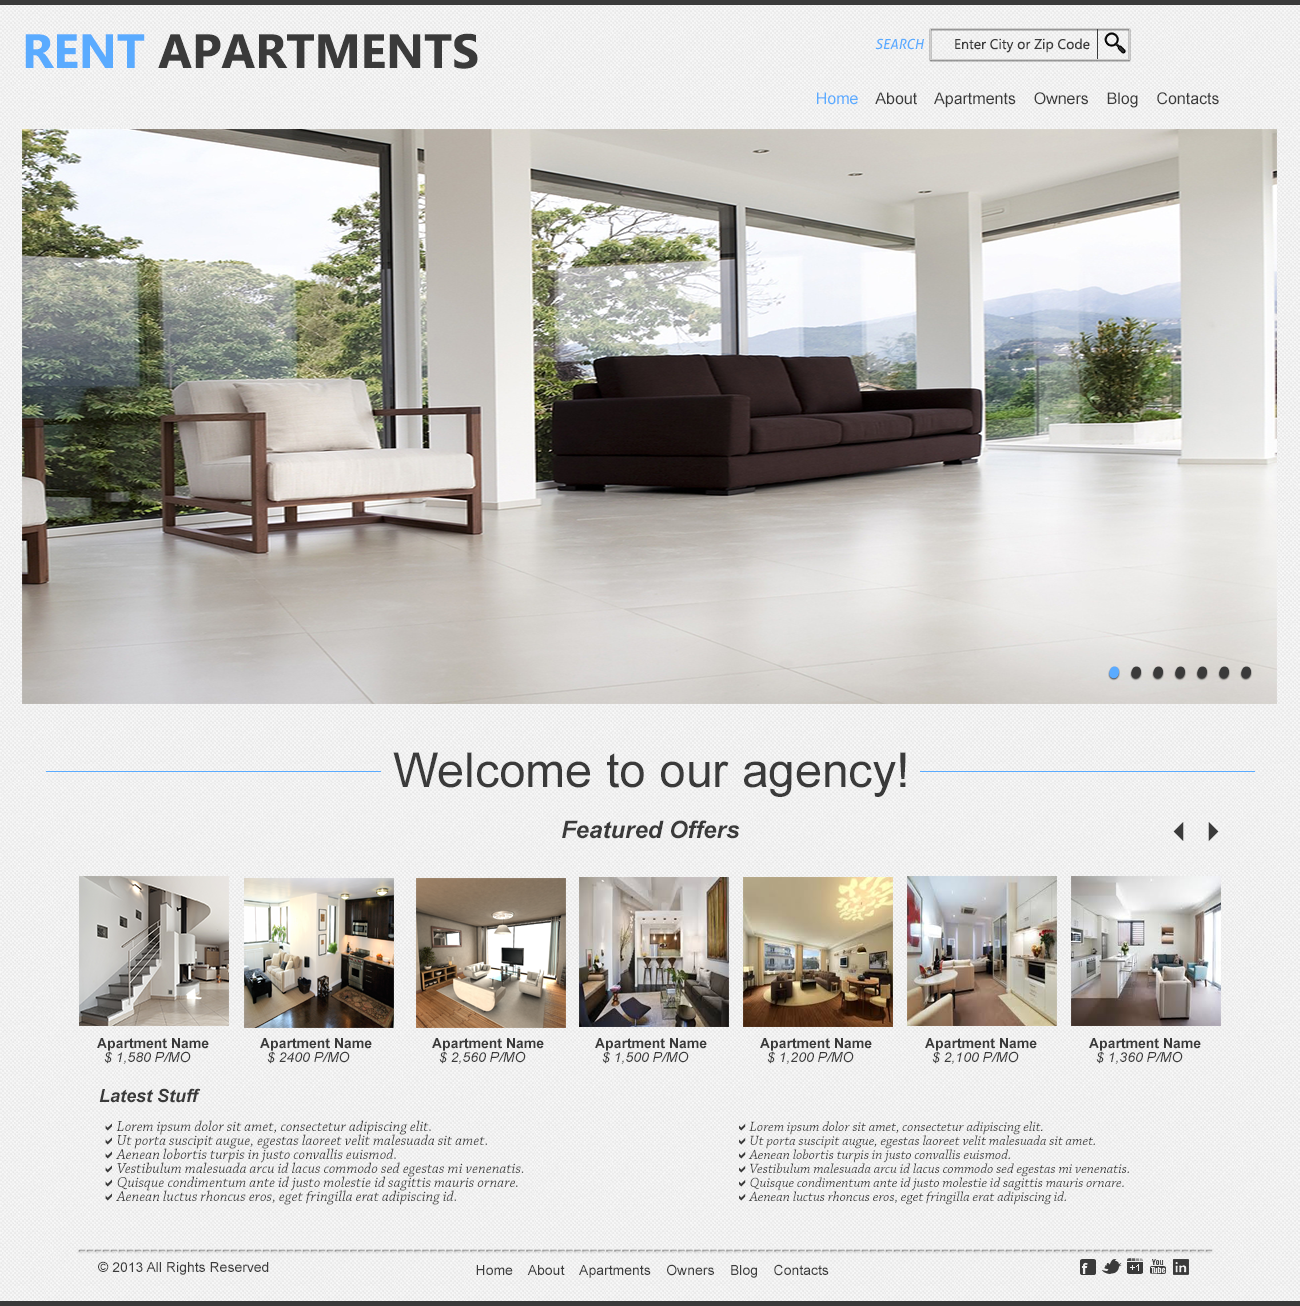 Rent Apartments - PSD Homepage Template by FasiullaKhan on DeviantArt With Regard To Apartment For Rent Flyer Template Free